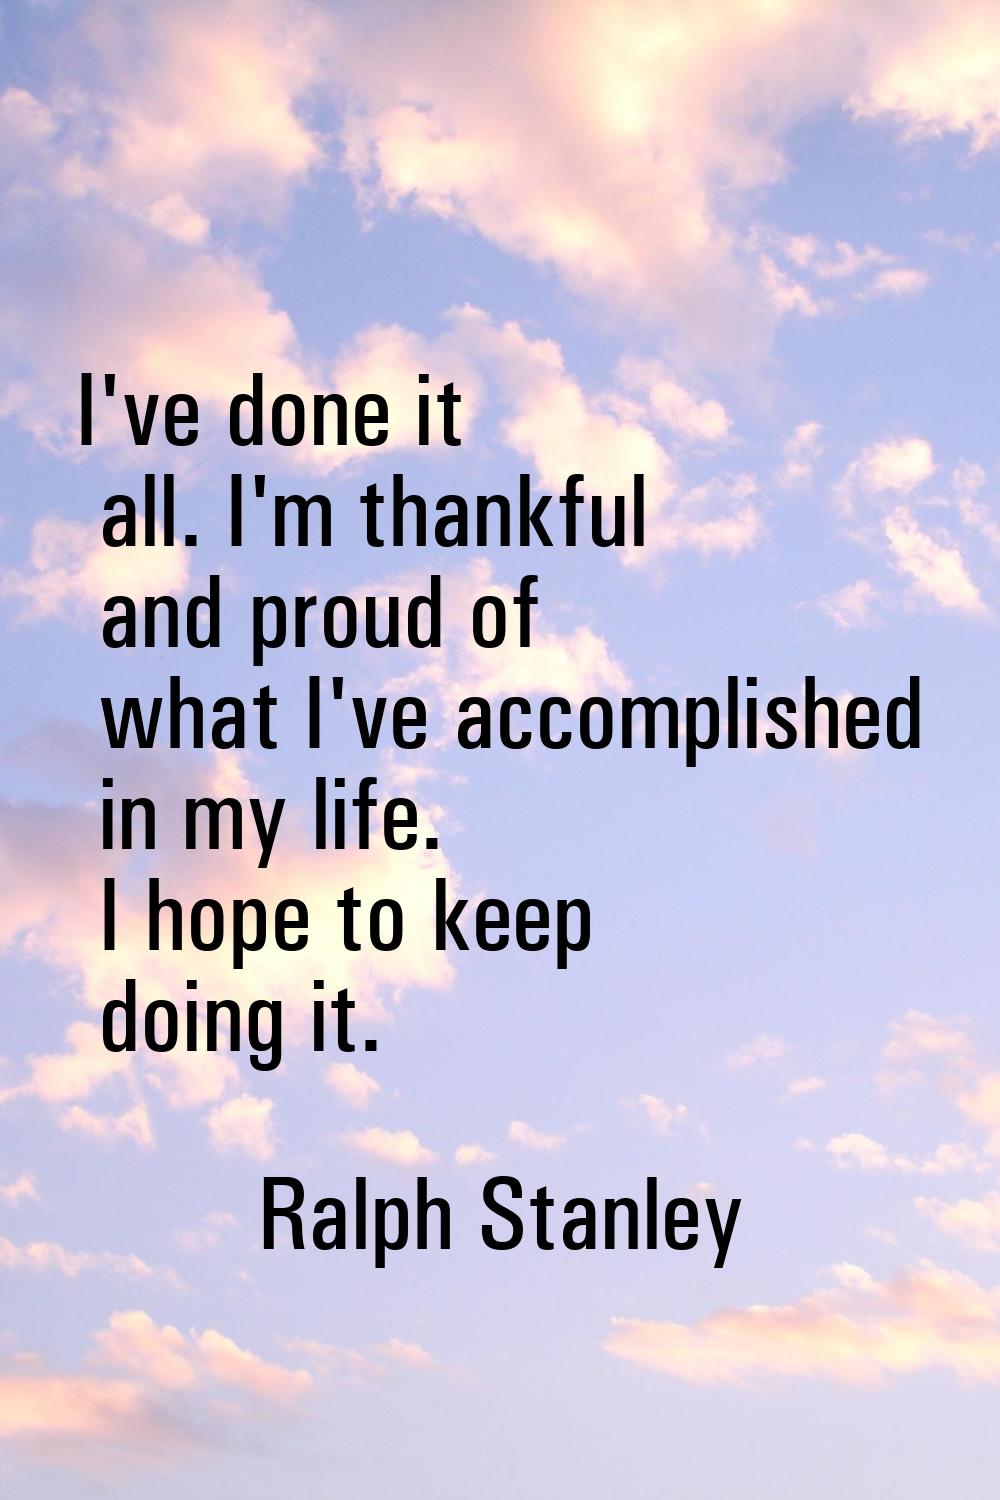 I've done it all. I'm thankful and proud of what I've accomplished in my life. I hope to keep doing